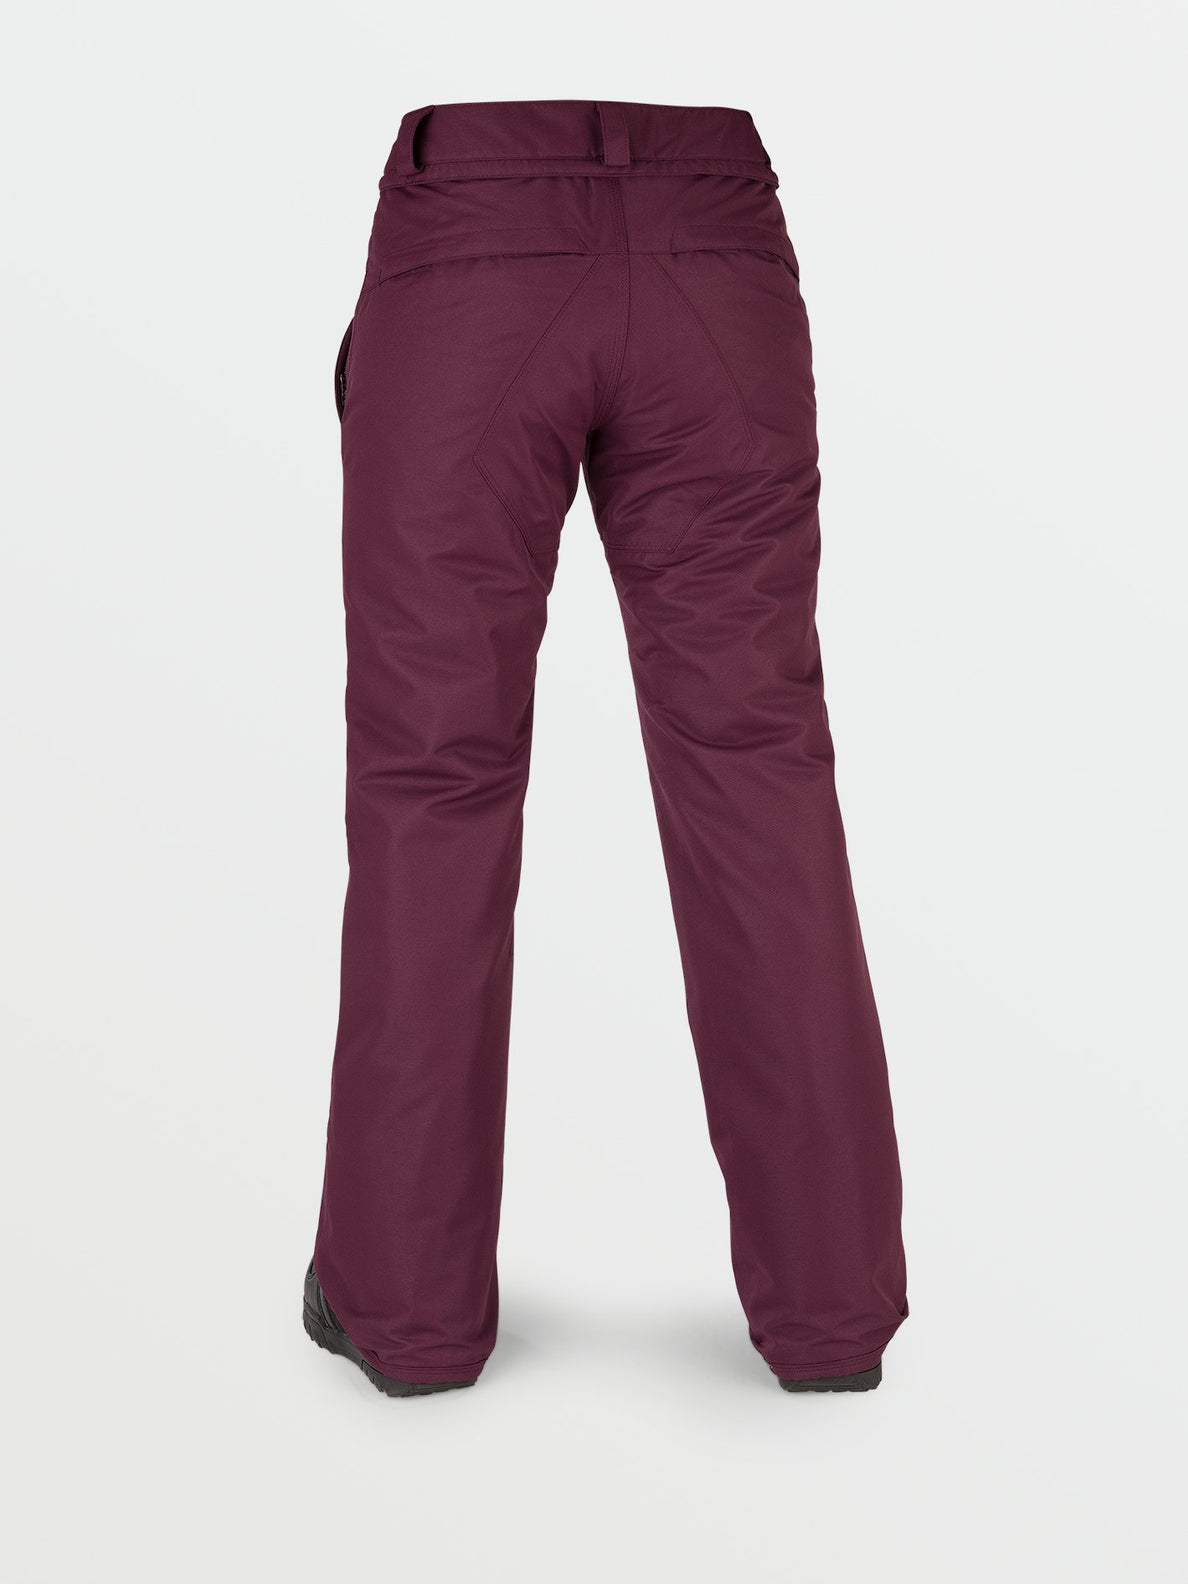 Frochickie Insulated Trousers - MERLOT (H1252203_MER) [B]